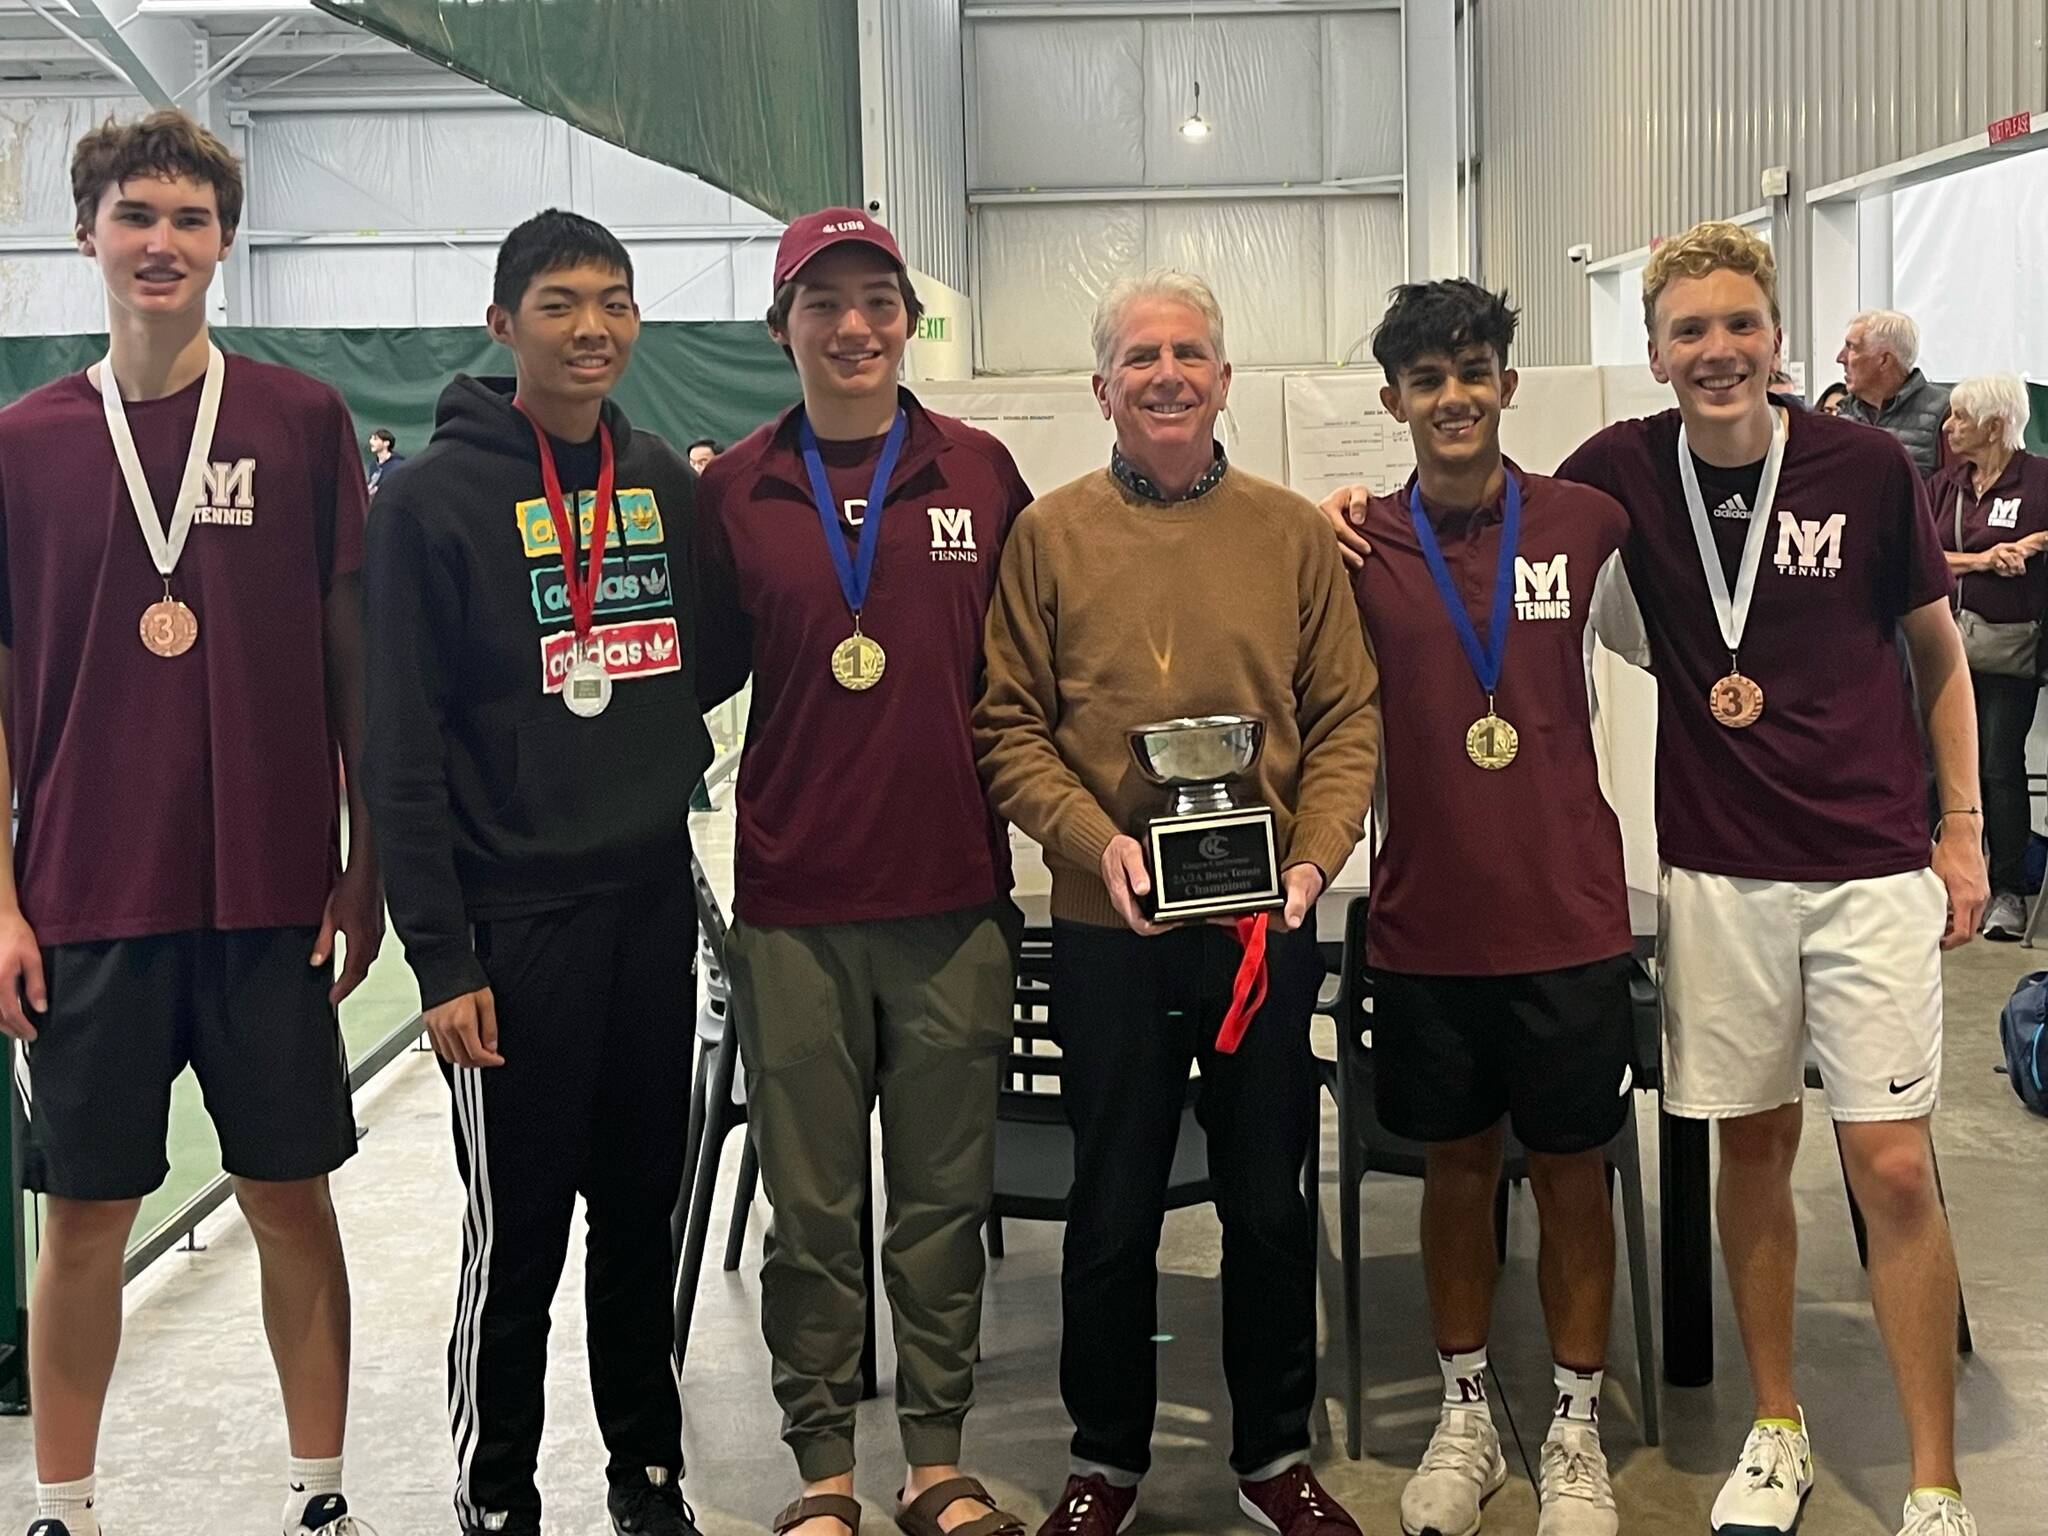 The Mercer Island High School (MIHS) boys varsity tennis team successfully defended its 3A KingCo title with a 13-0 season record and won the recent KingCo tournament. Advancing to the district tournament in the spring are the top three doubles teams from the tournament, all from MIHS: First place, Gian Manhas/Nathan Wen; second place, Connor Leung/Sam Dilworth; and third place, Logan Herzinger/Charlie May. Pictured from left to right are: May, Leung, Wen, coach Ron Akins, Manhas and Herzinger. (Not pictured, Dilworth.) Leung and Dilworth have both committed to play college tennis next season. Leung will attend Emerson College in Boston and plans to major in media arts production; Dilworth will play for Colorado College and plans to study business. Both are pictured below, left to right. Courtesy photos